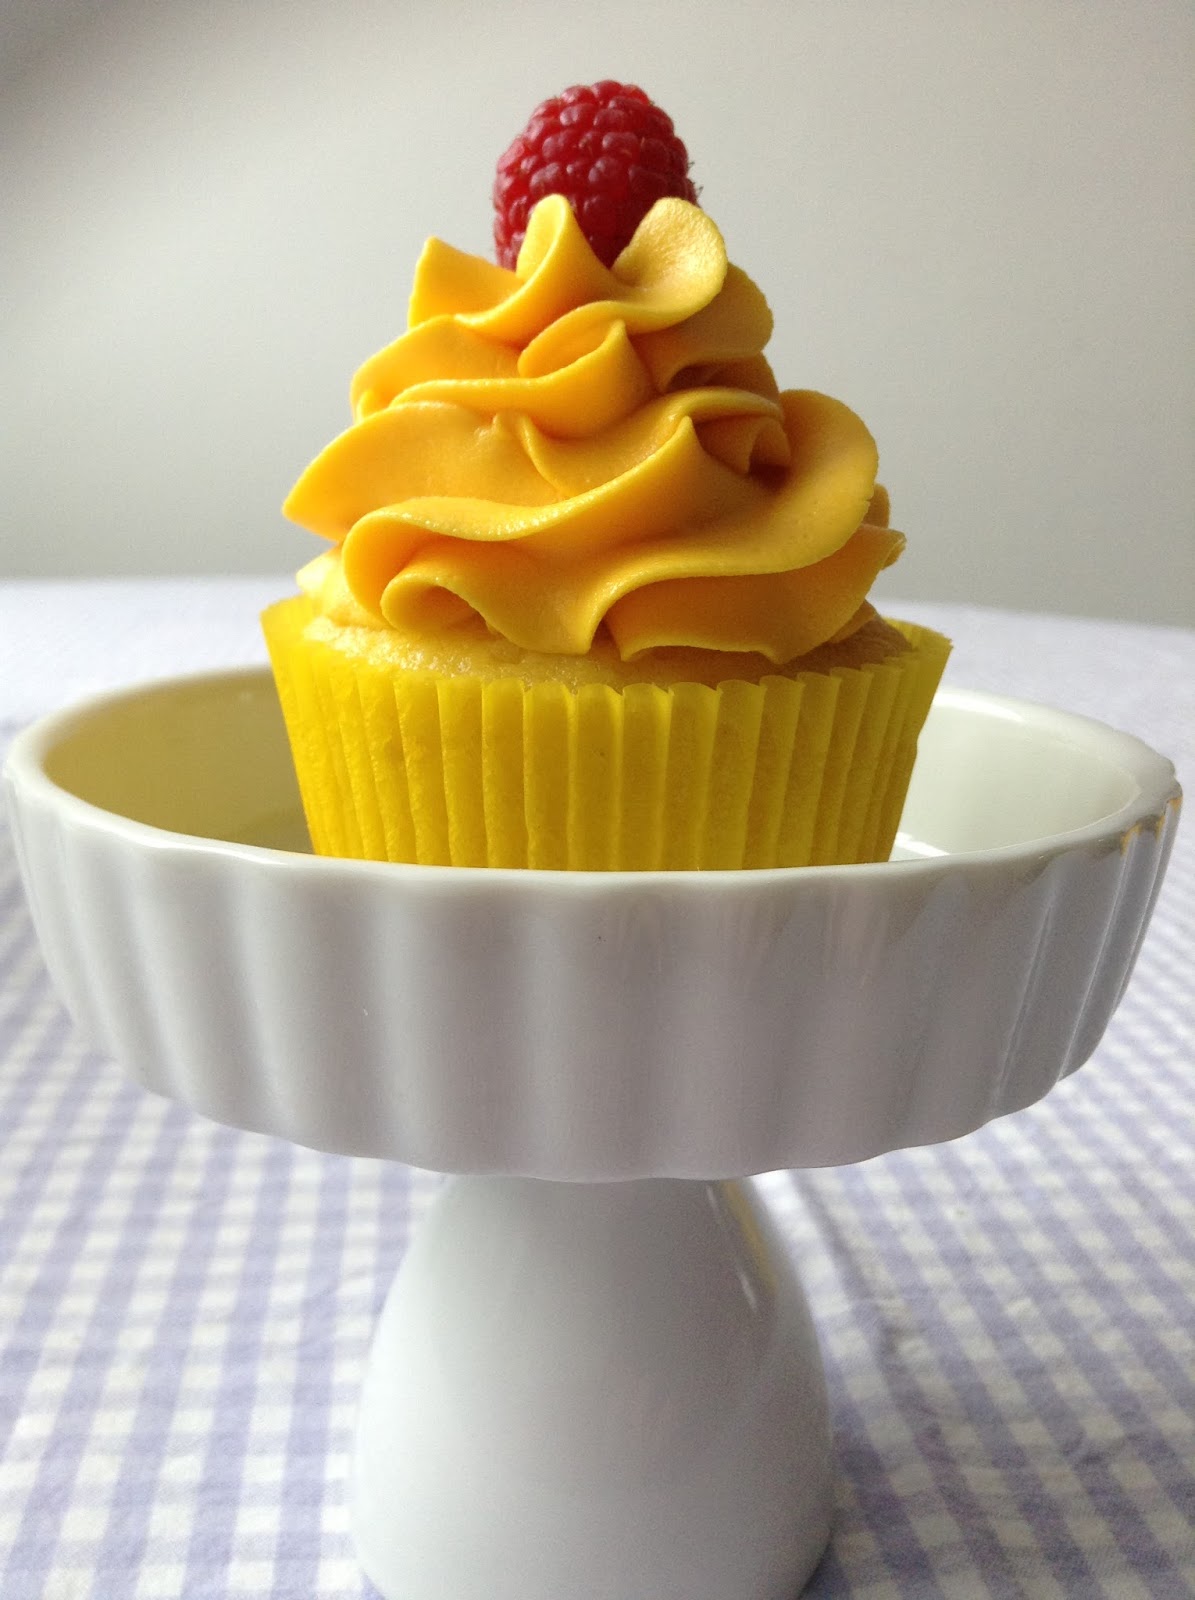 The Sugary Shrink: Lemon Cupcake with Raspberry Curd Cream Filling